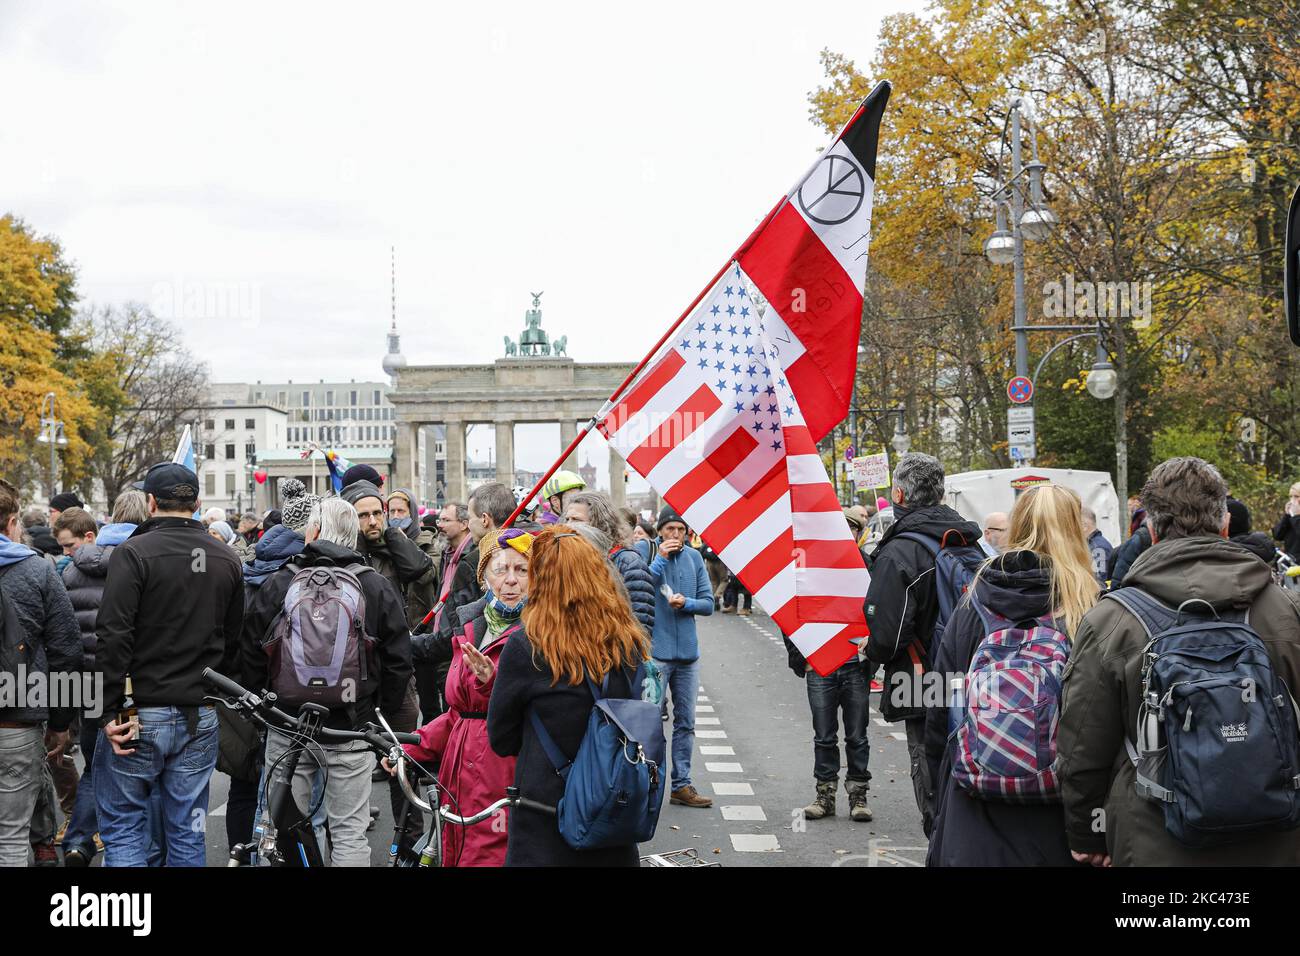 People take part in a demonstration against the Coronavirus regulations in Berlin, Germany, on November 18, 2020. The riot police used teargas and water guns against protesters after not evacuating the place in front of the Brandenburger Tor area. (Photo by Achille Abboud/NurPhoto) Stock Photo